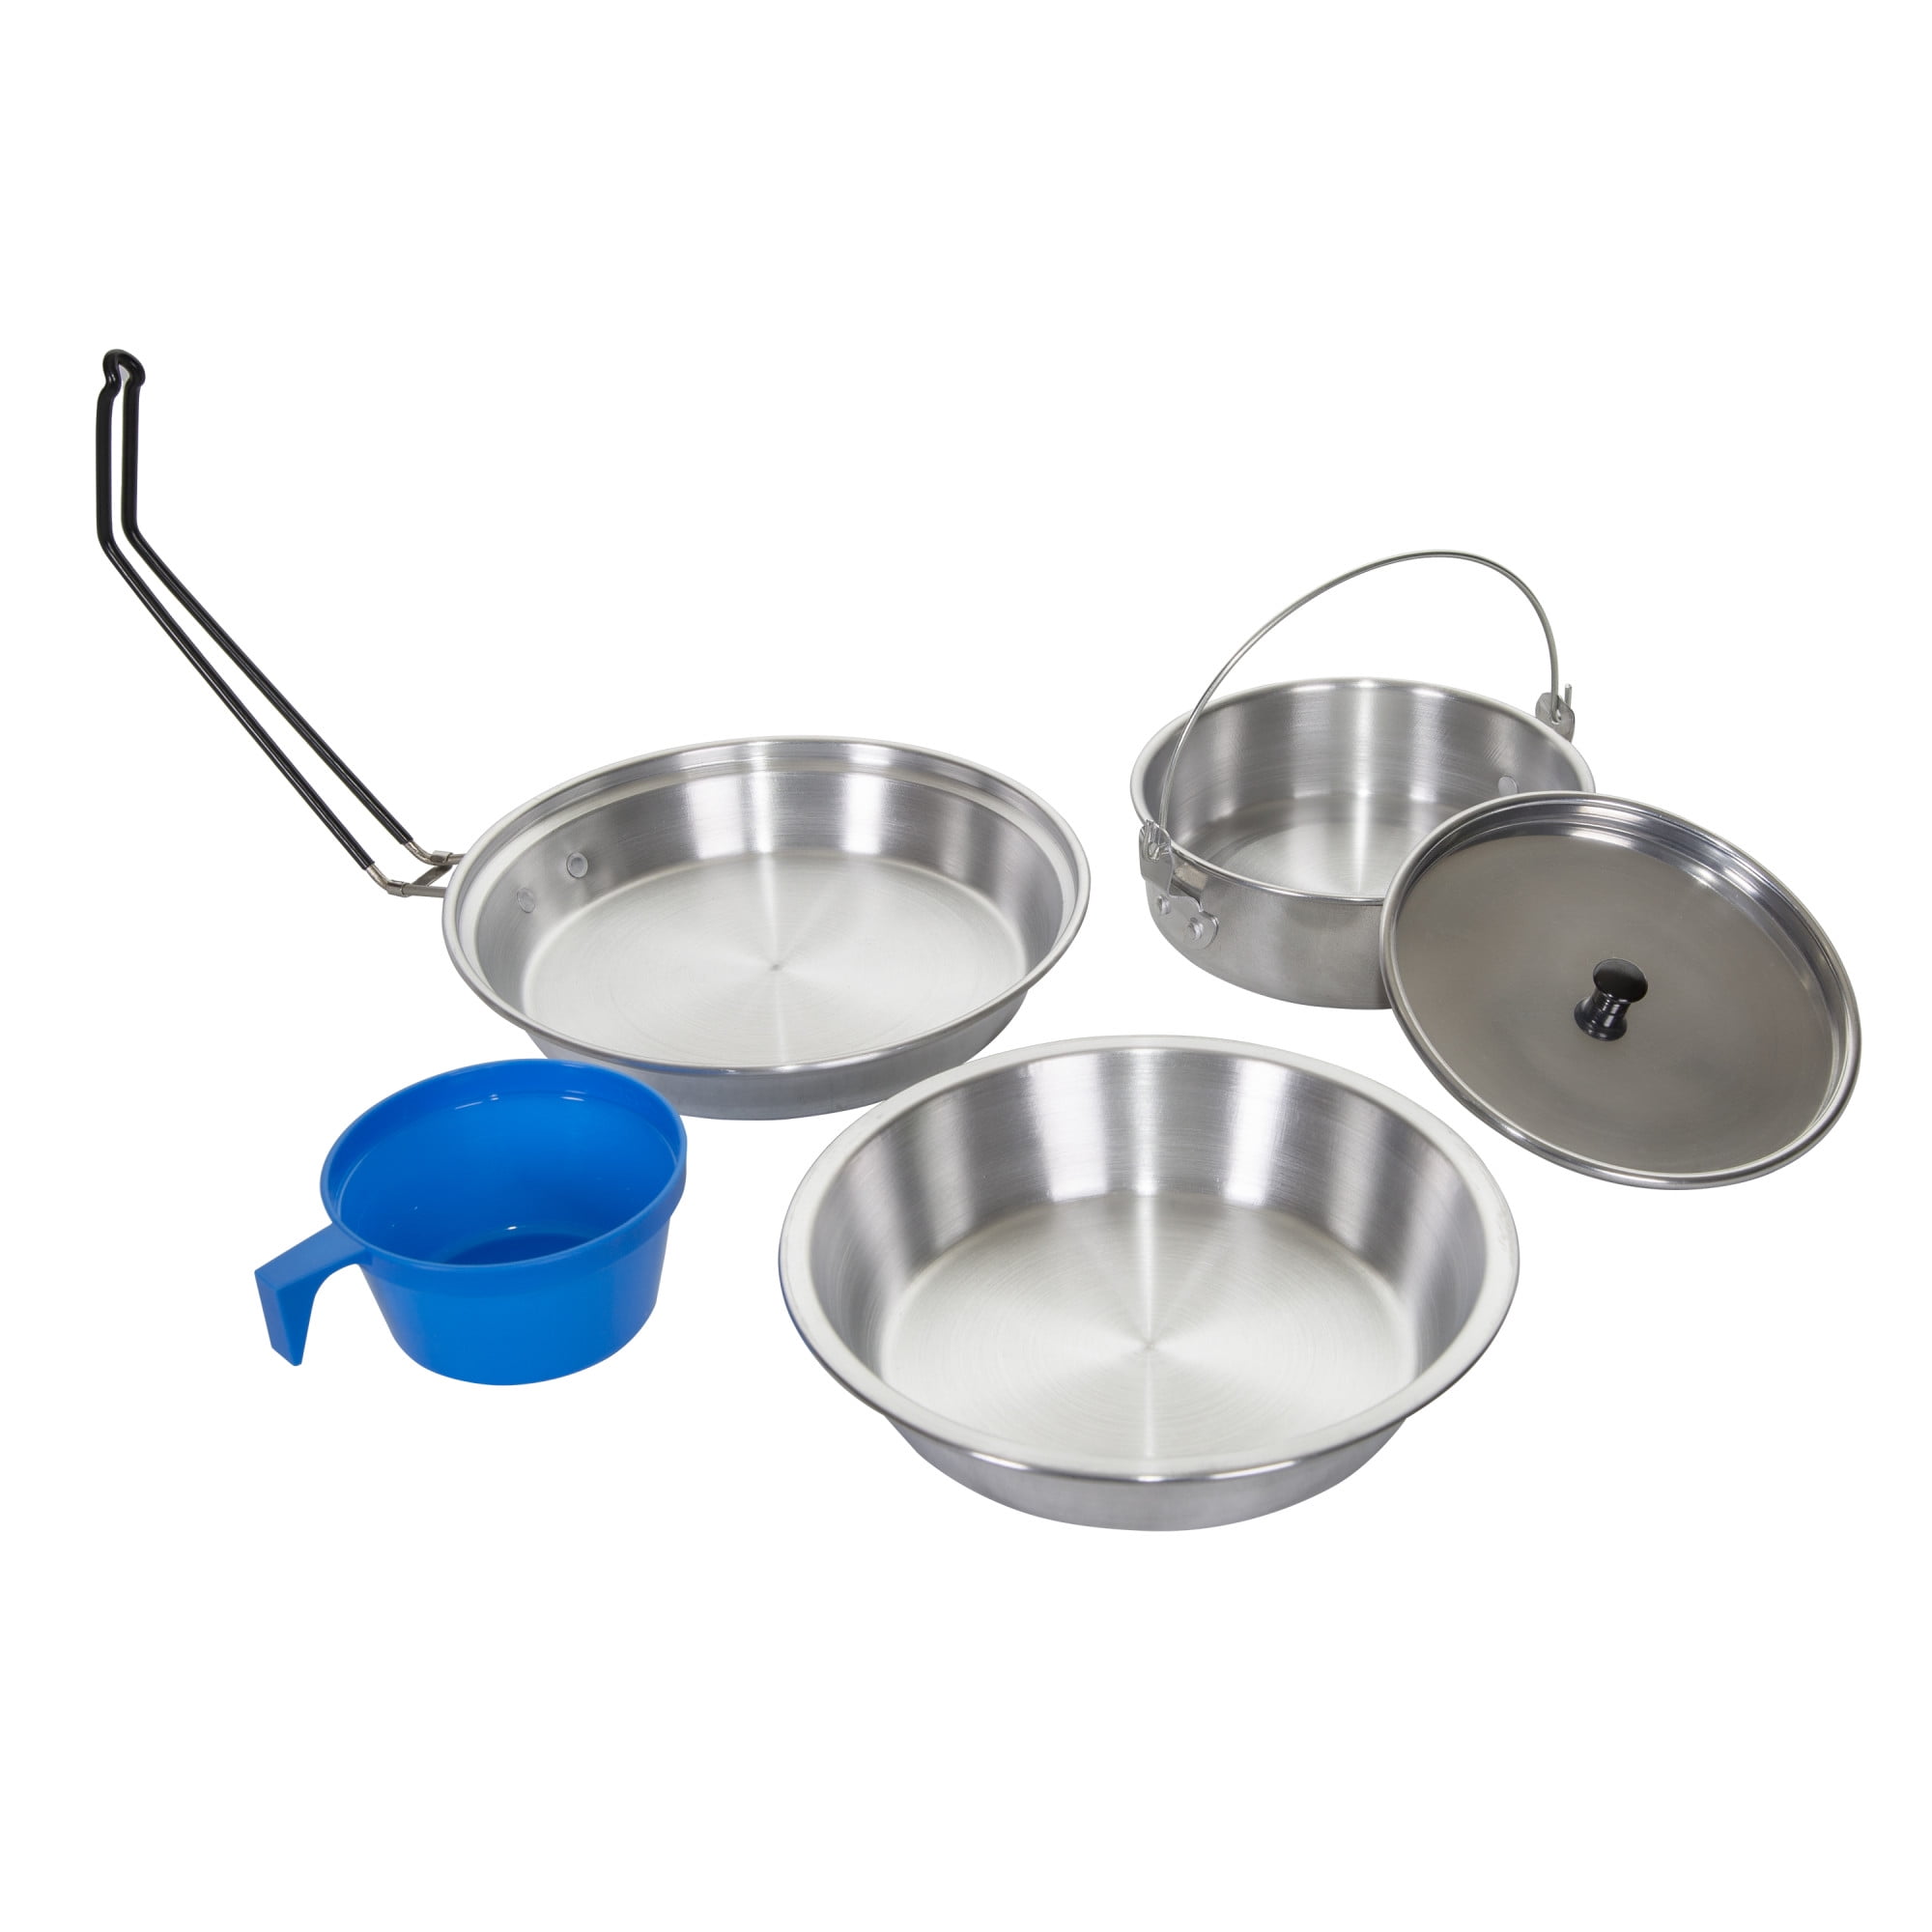 3 Pk Coleman 5 Pc Aluminum Camping Mess Cooking Cook Kit With Cover 2000016402 